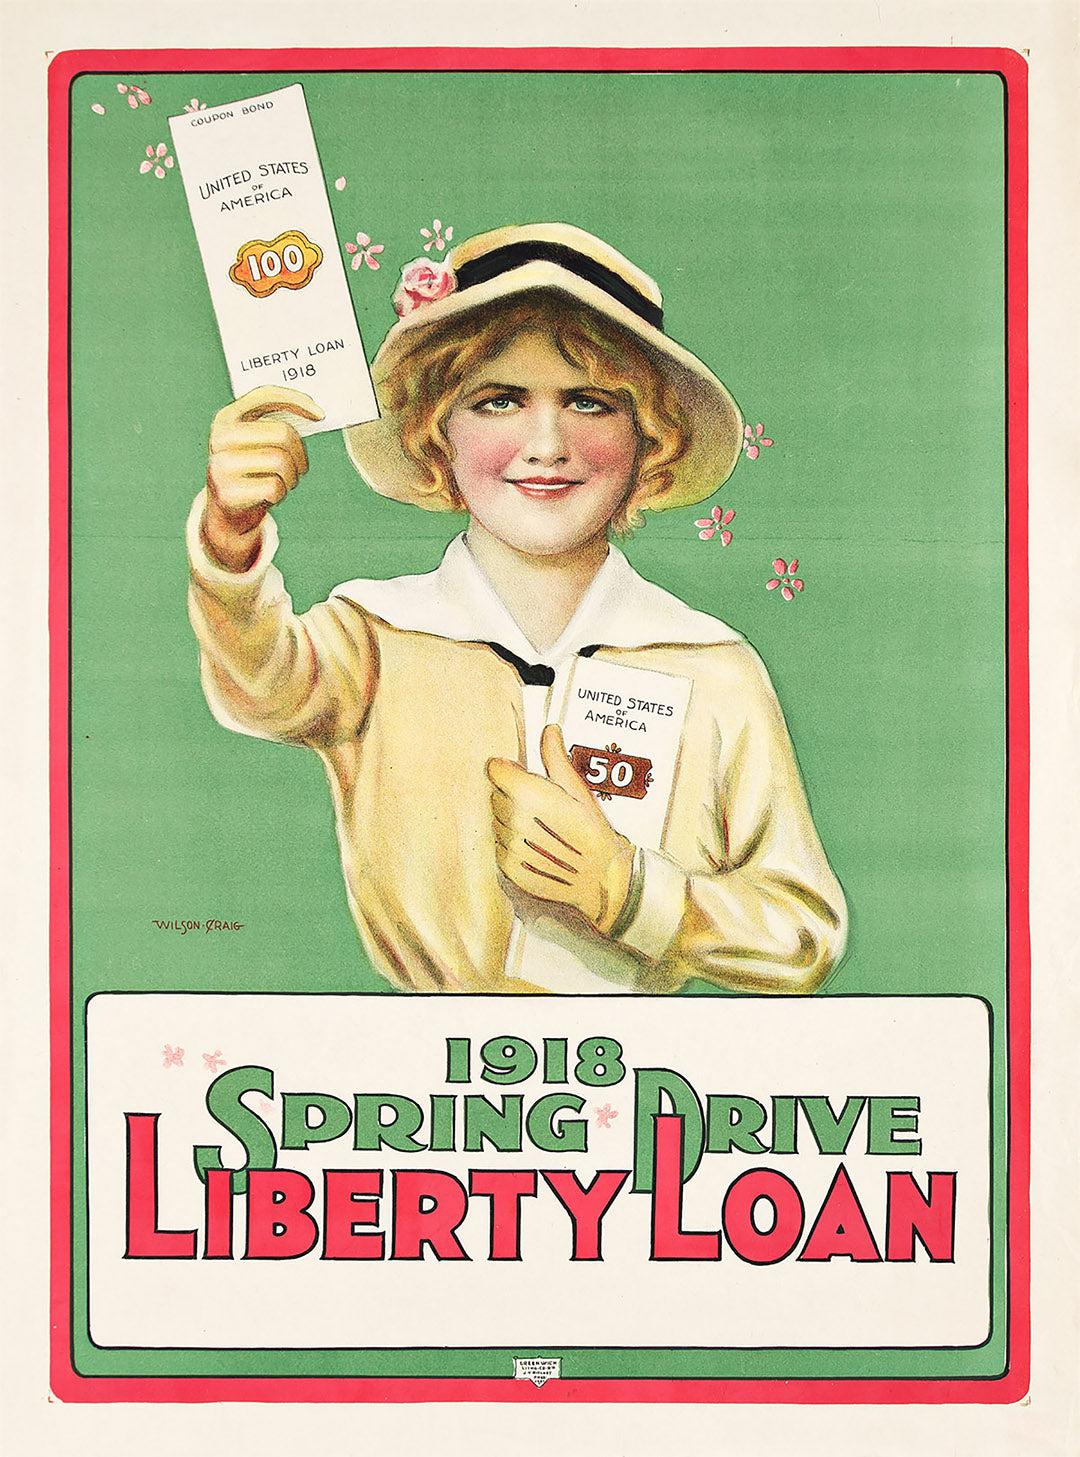 home loan poster